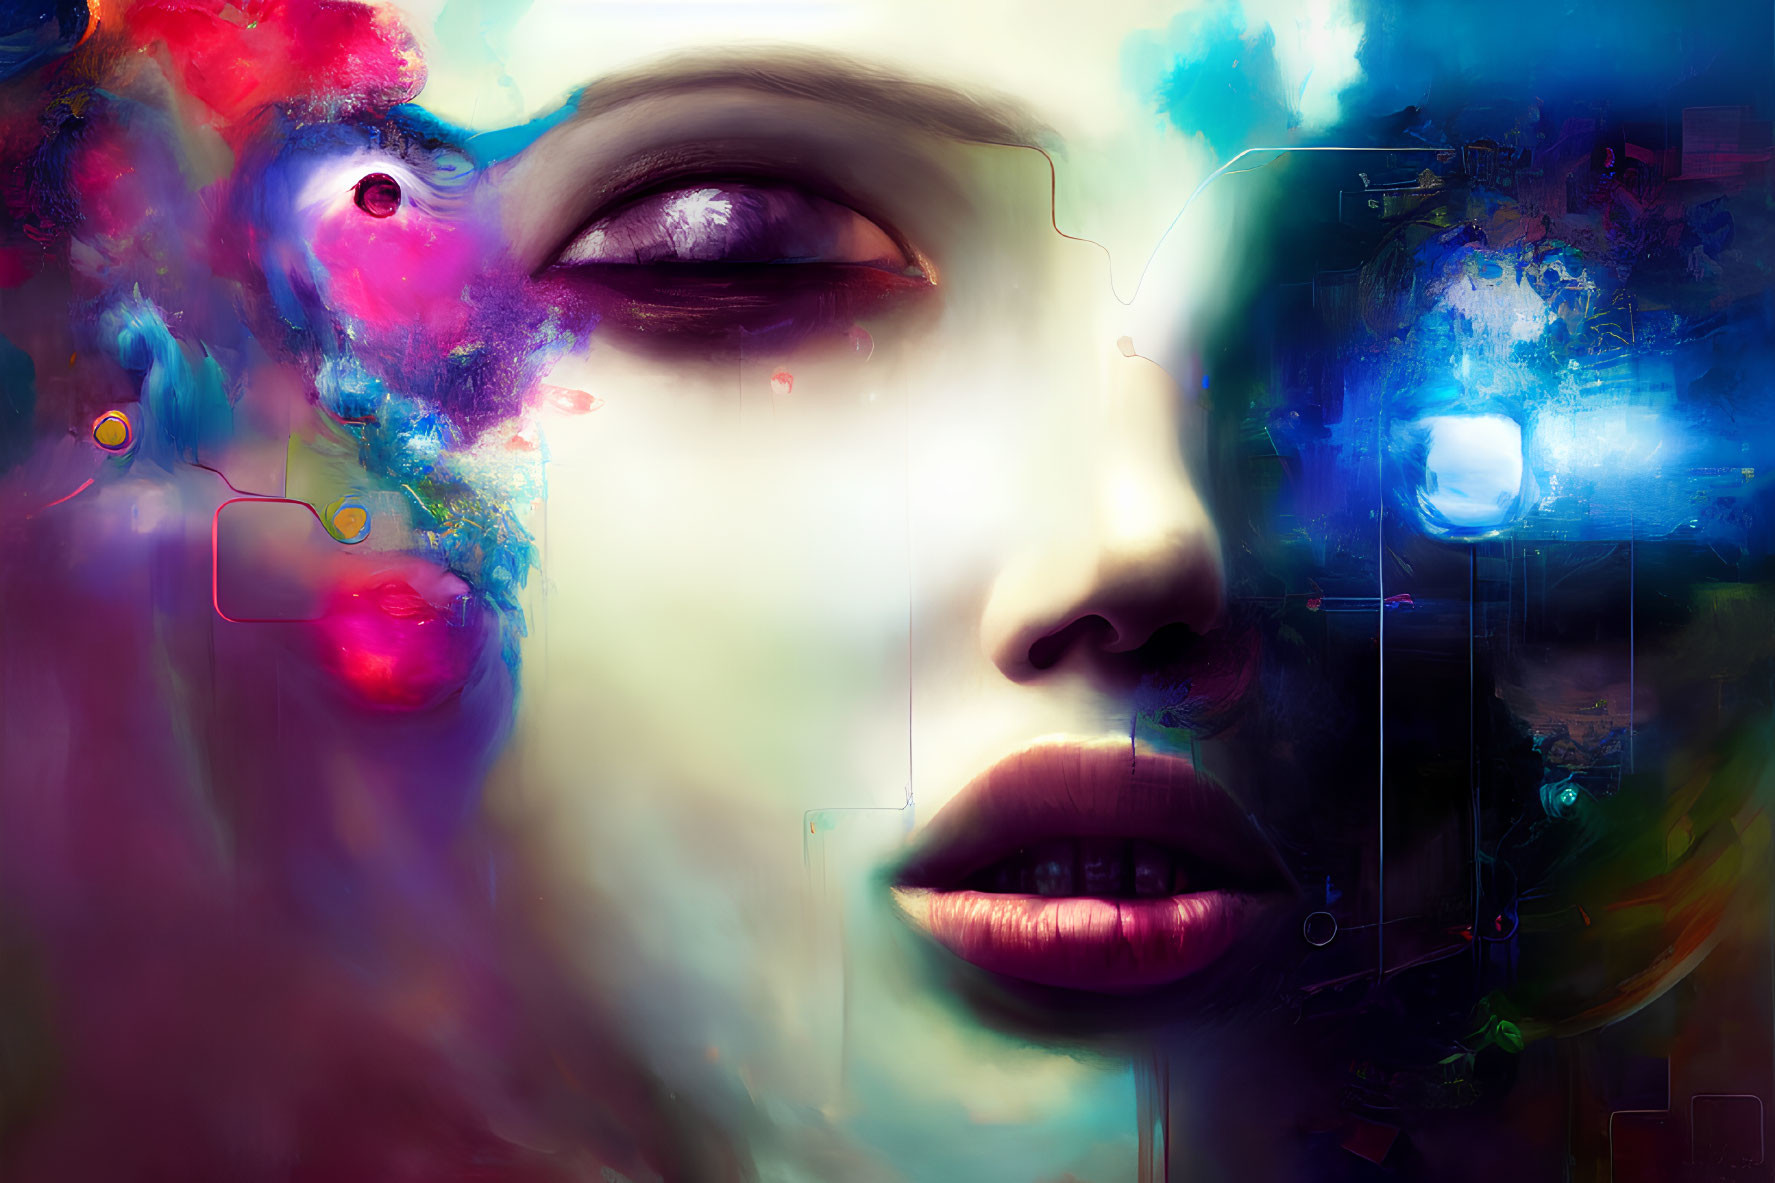 Colorful Abstract Female Face Artwork with Geometric Shapes